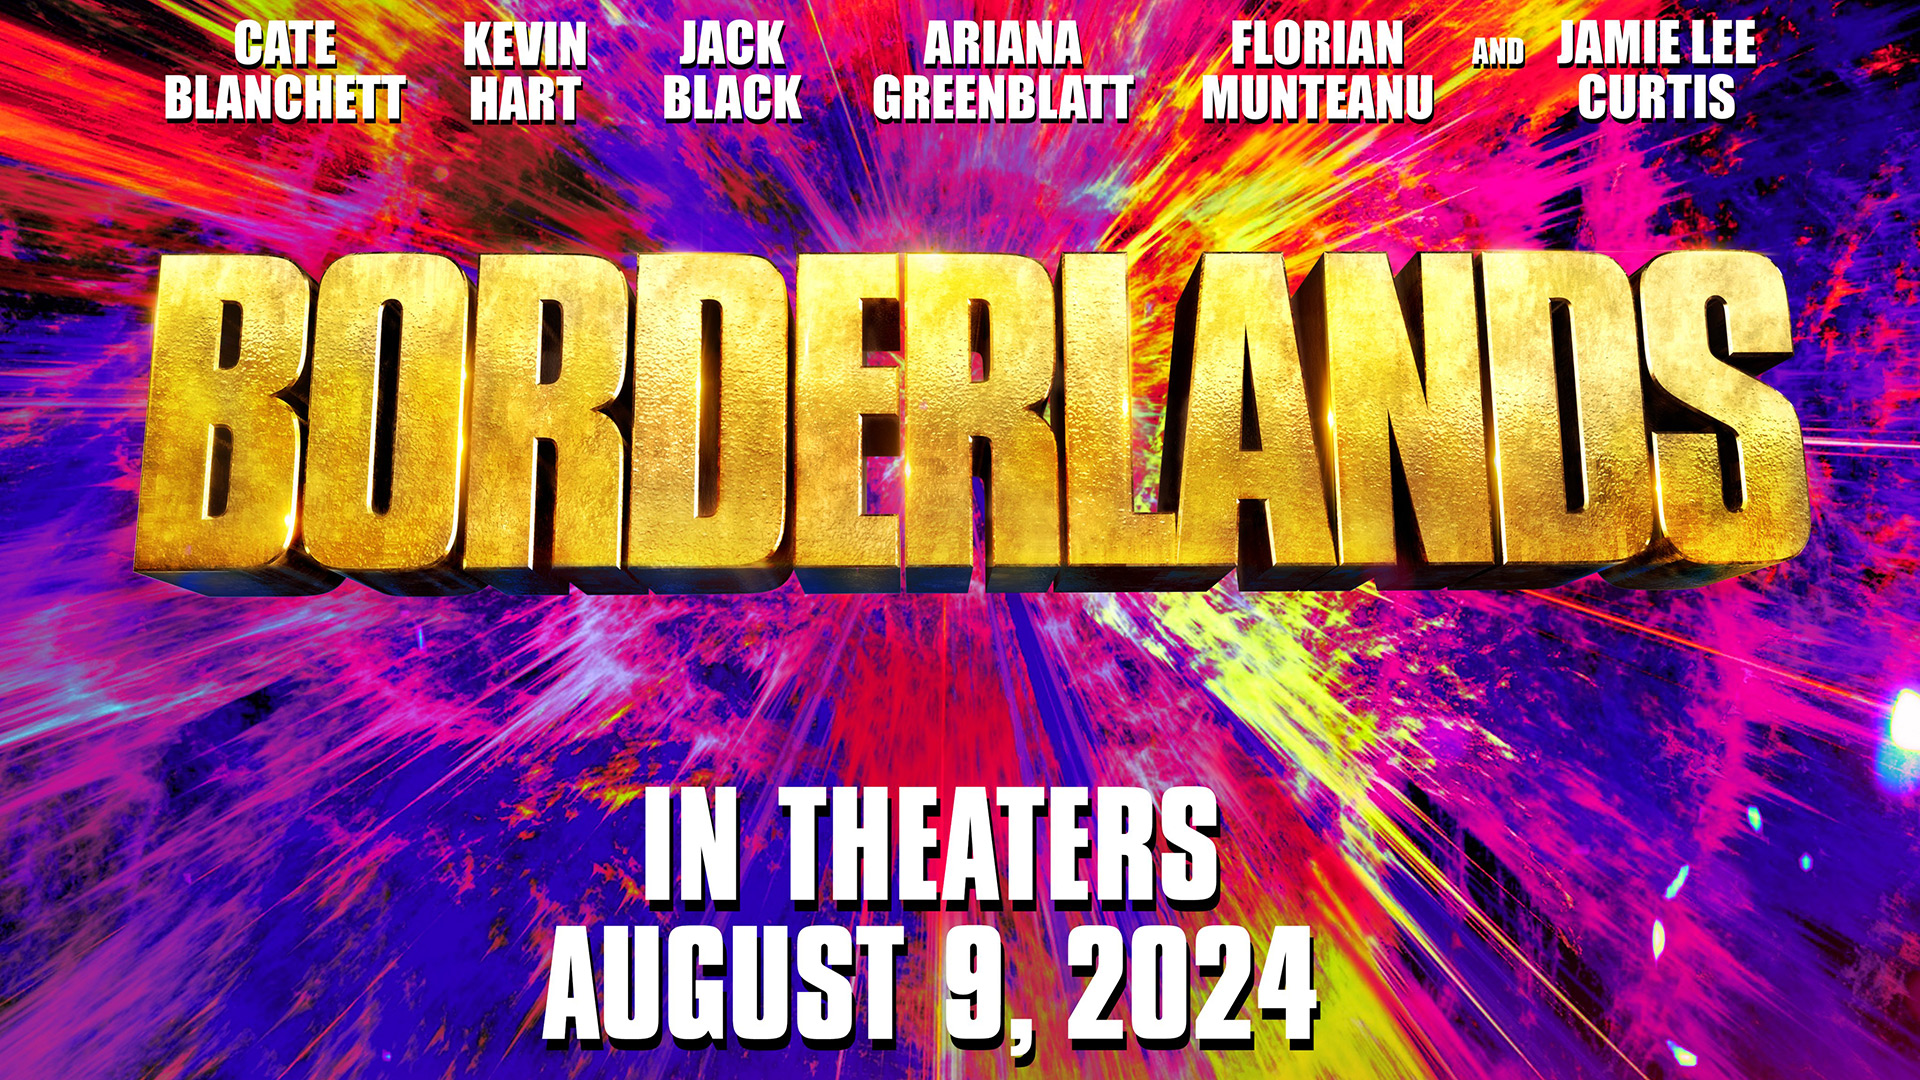 Borderlands Movie Hits Theaters August 9, 2024 FullCleared